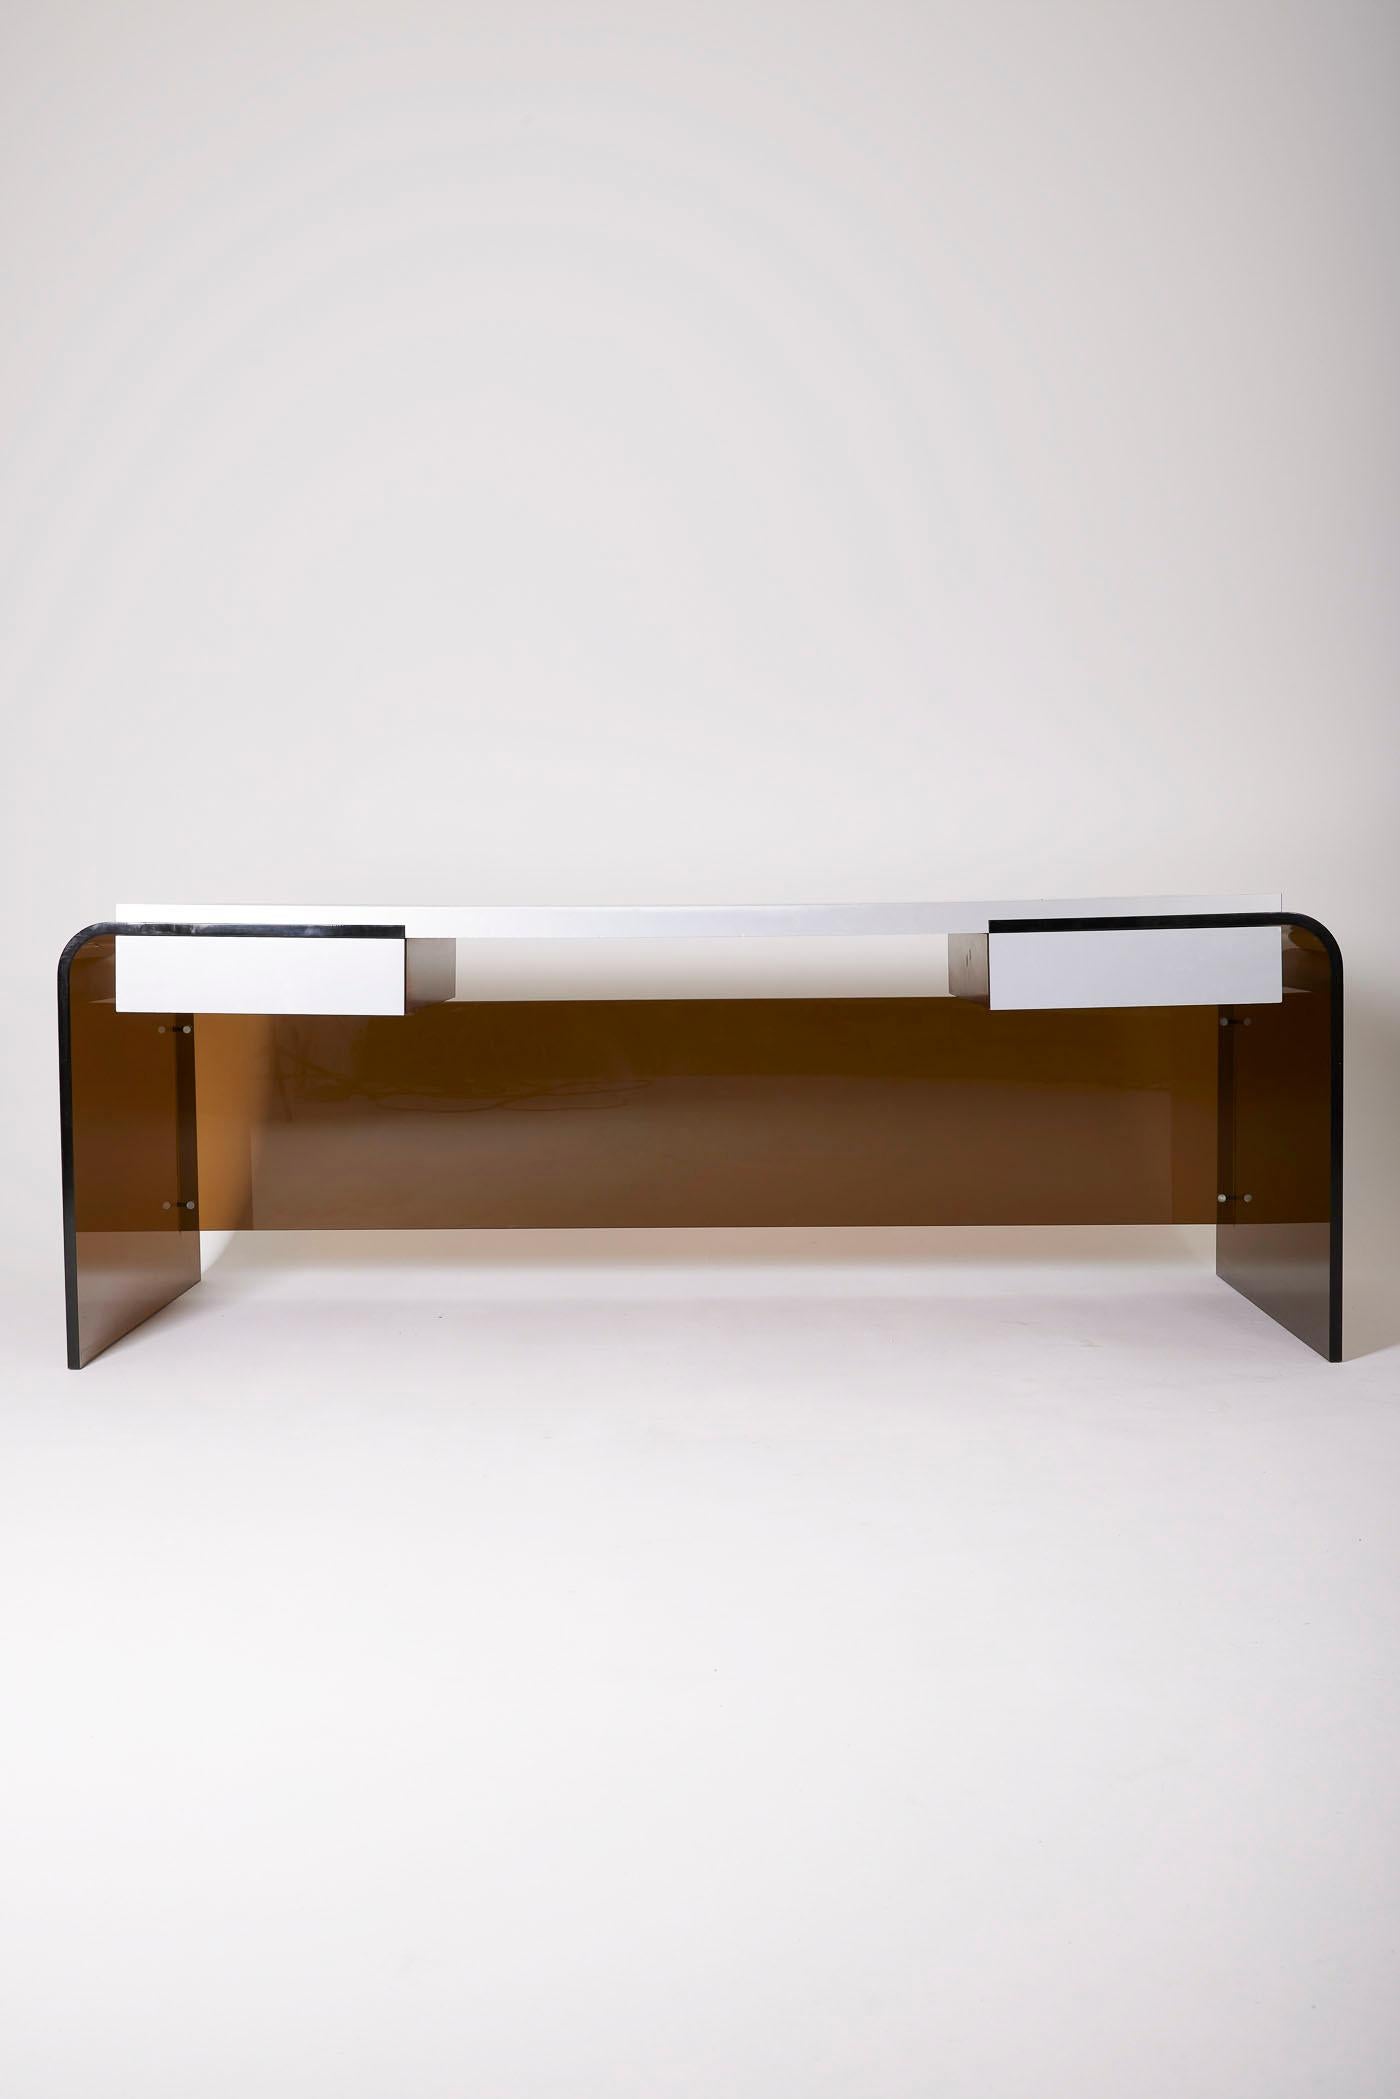 Large acrylic glass and ebony desk, 1970s. The top is made of Macassar ebony with brushed steel details, and the base is smoked plexiglass. The desk is equipped with 2 drawers. Good condition.
LP1274